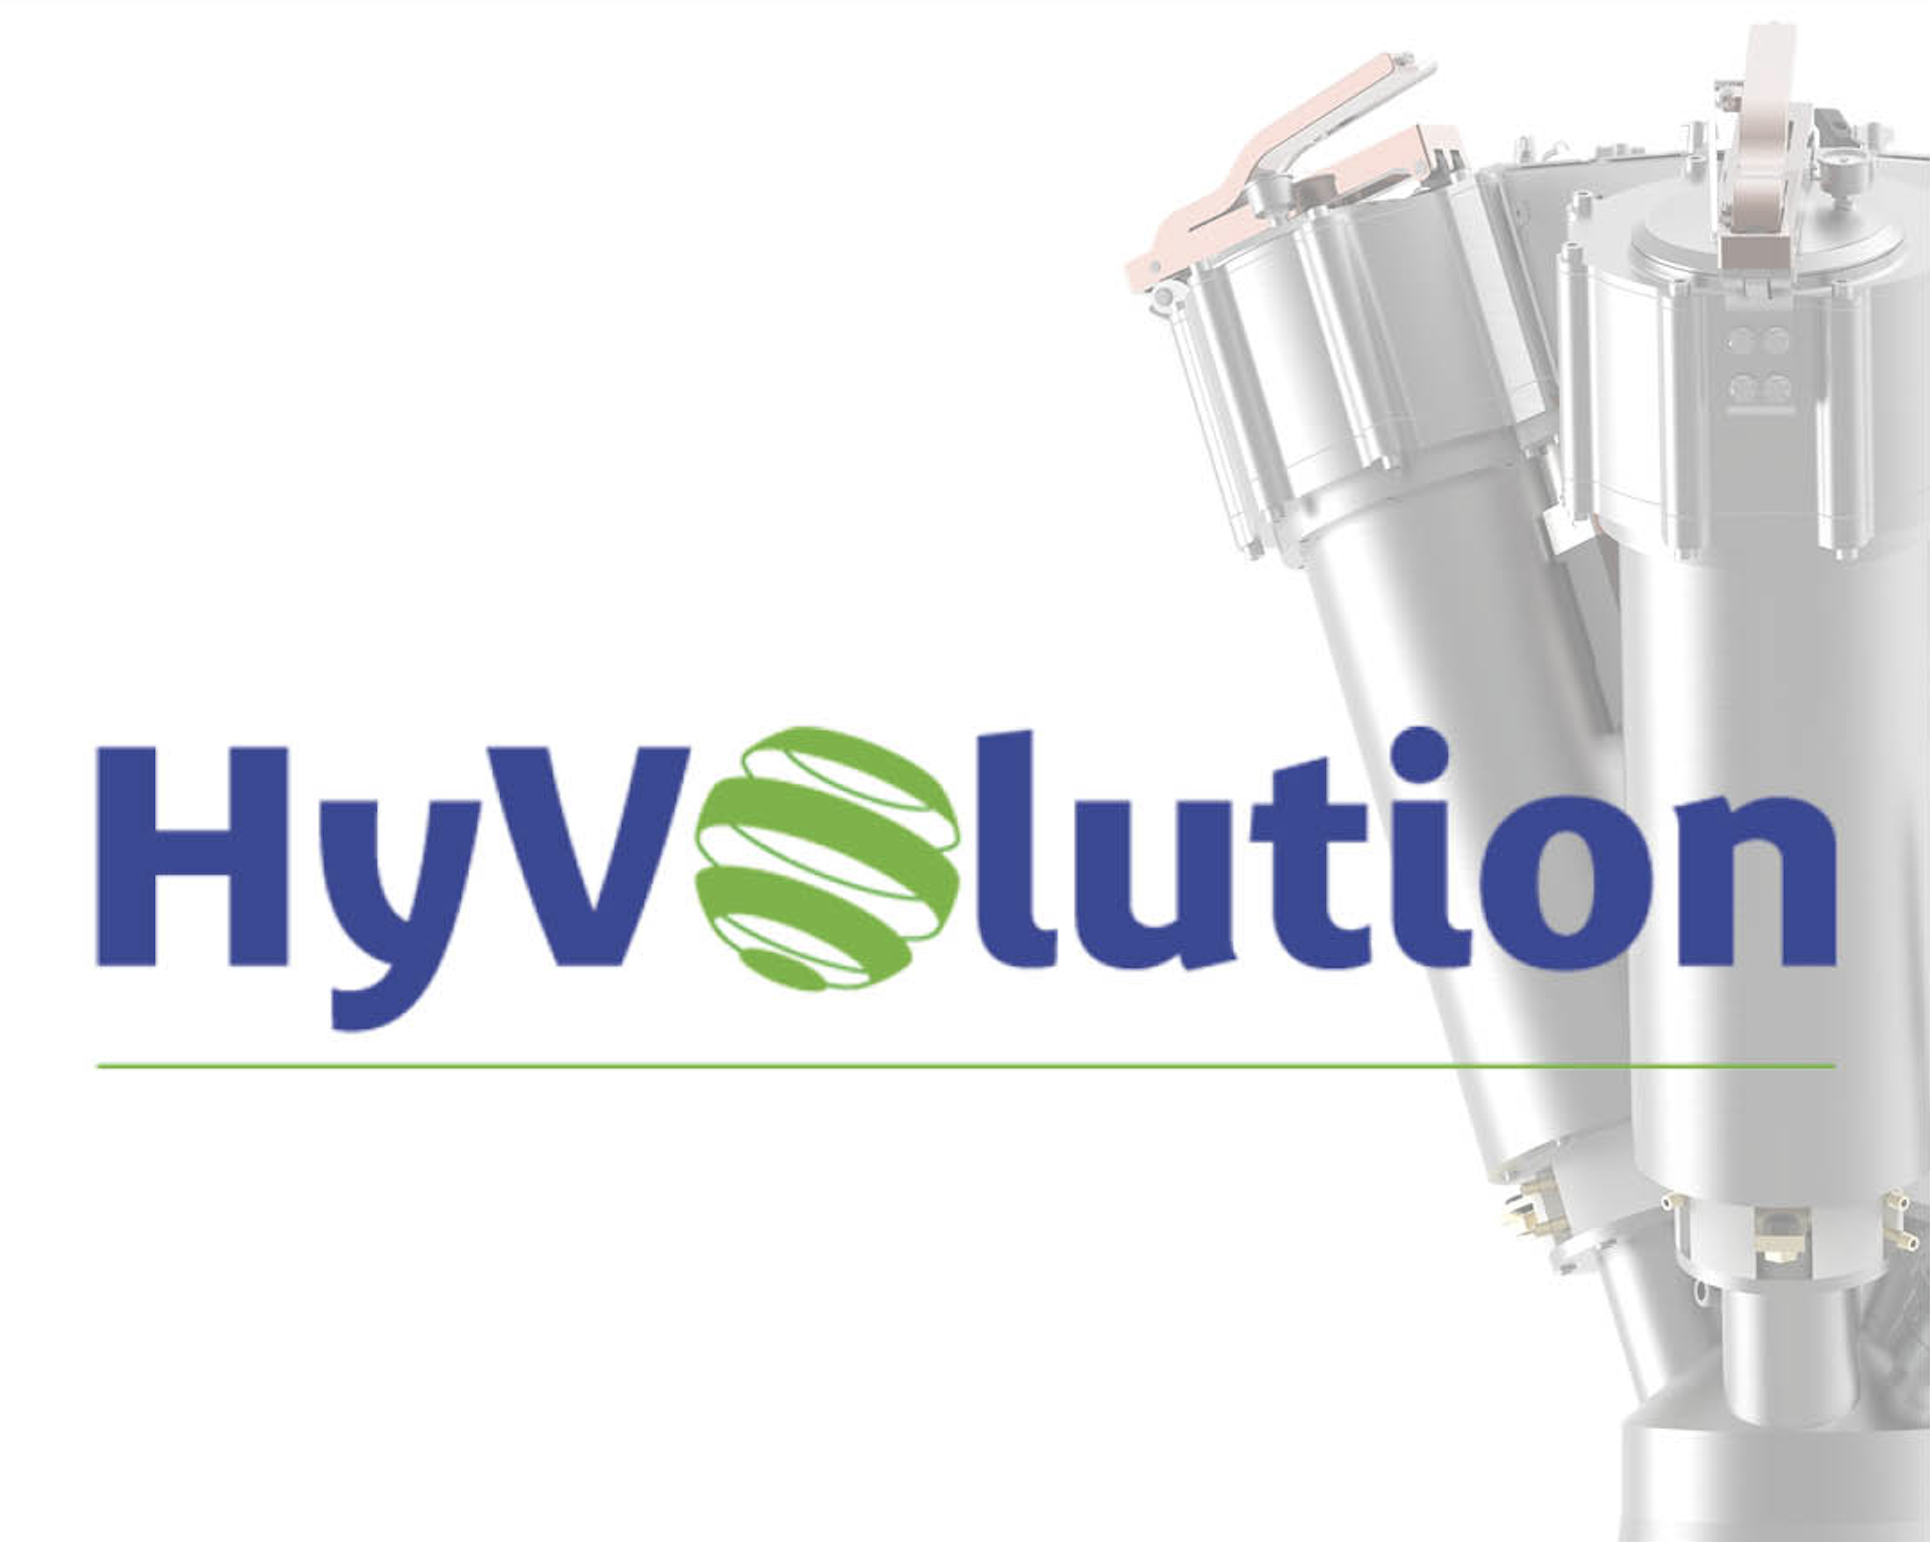 Hyvolution in Paris is coming up